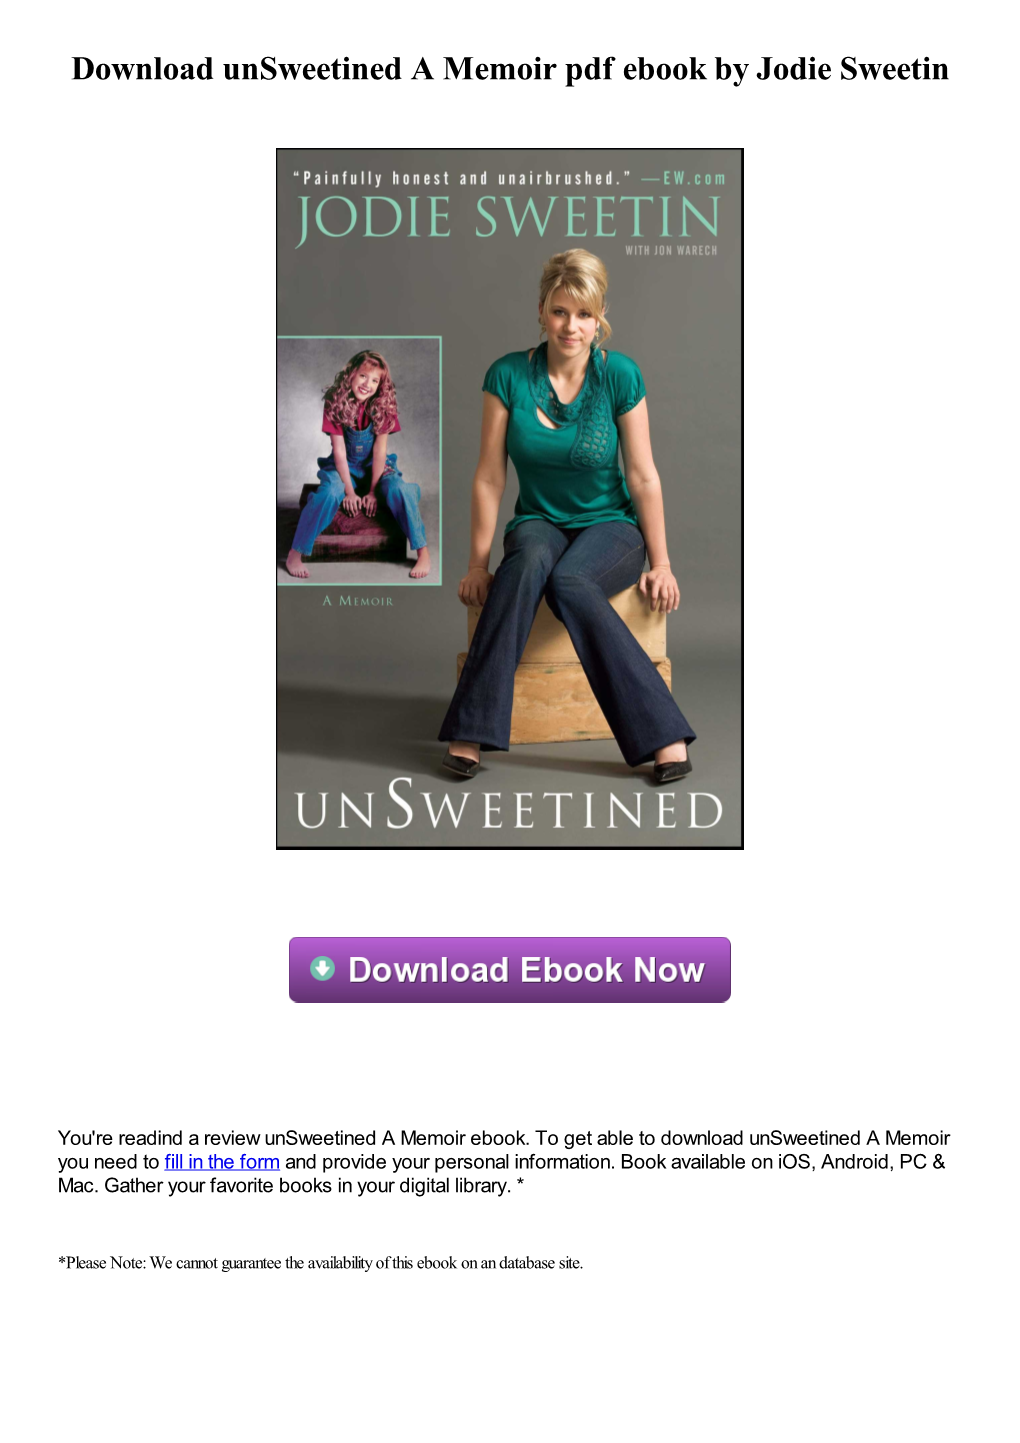 Download Unsweetined a Memoir Pdf Book by Jodie Sweetin